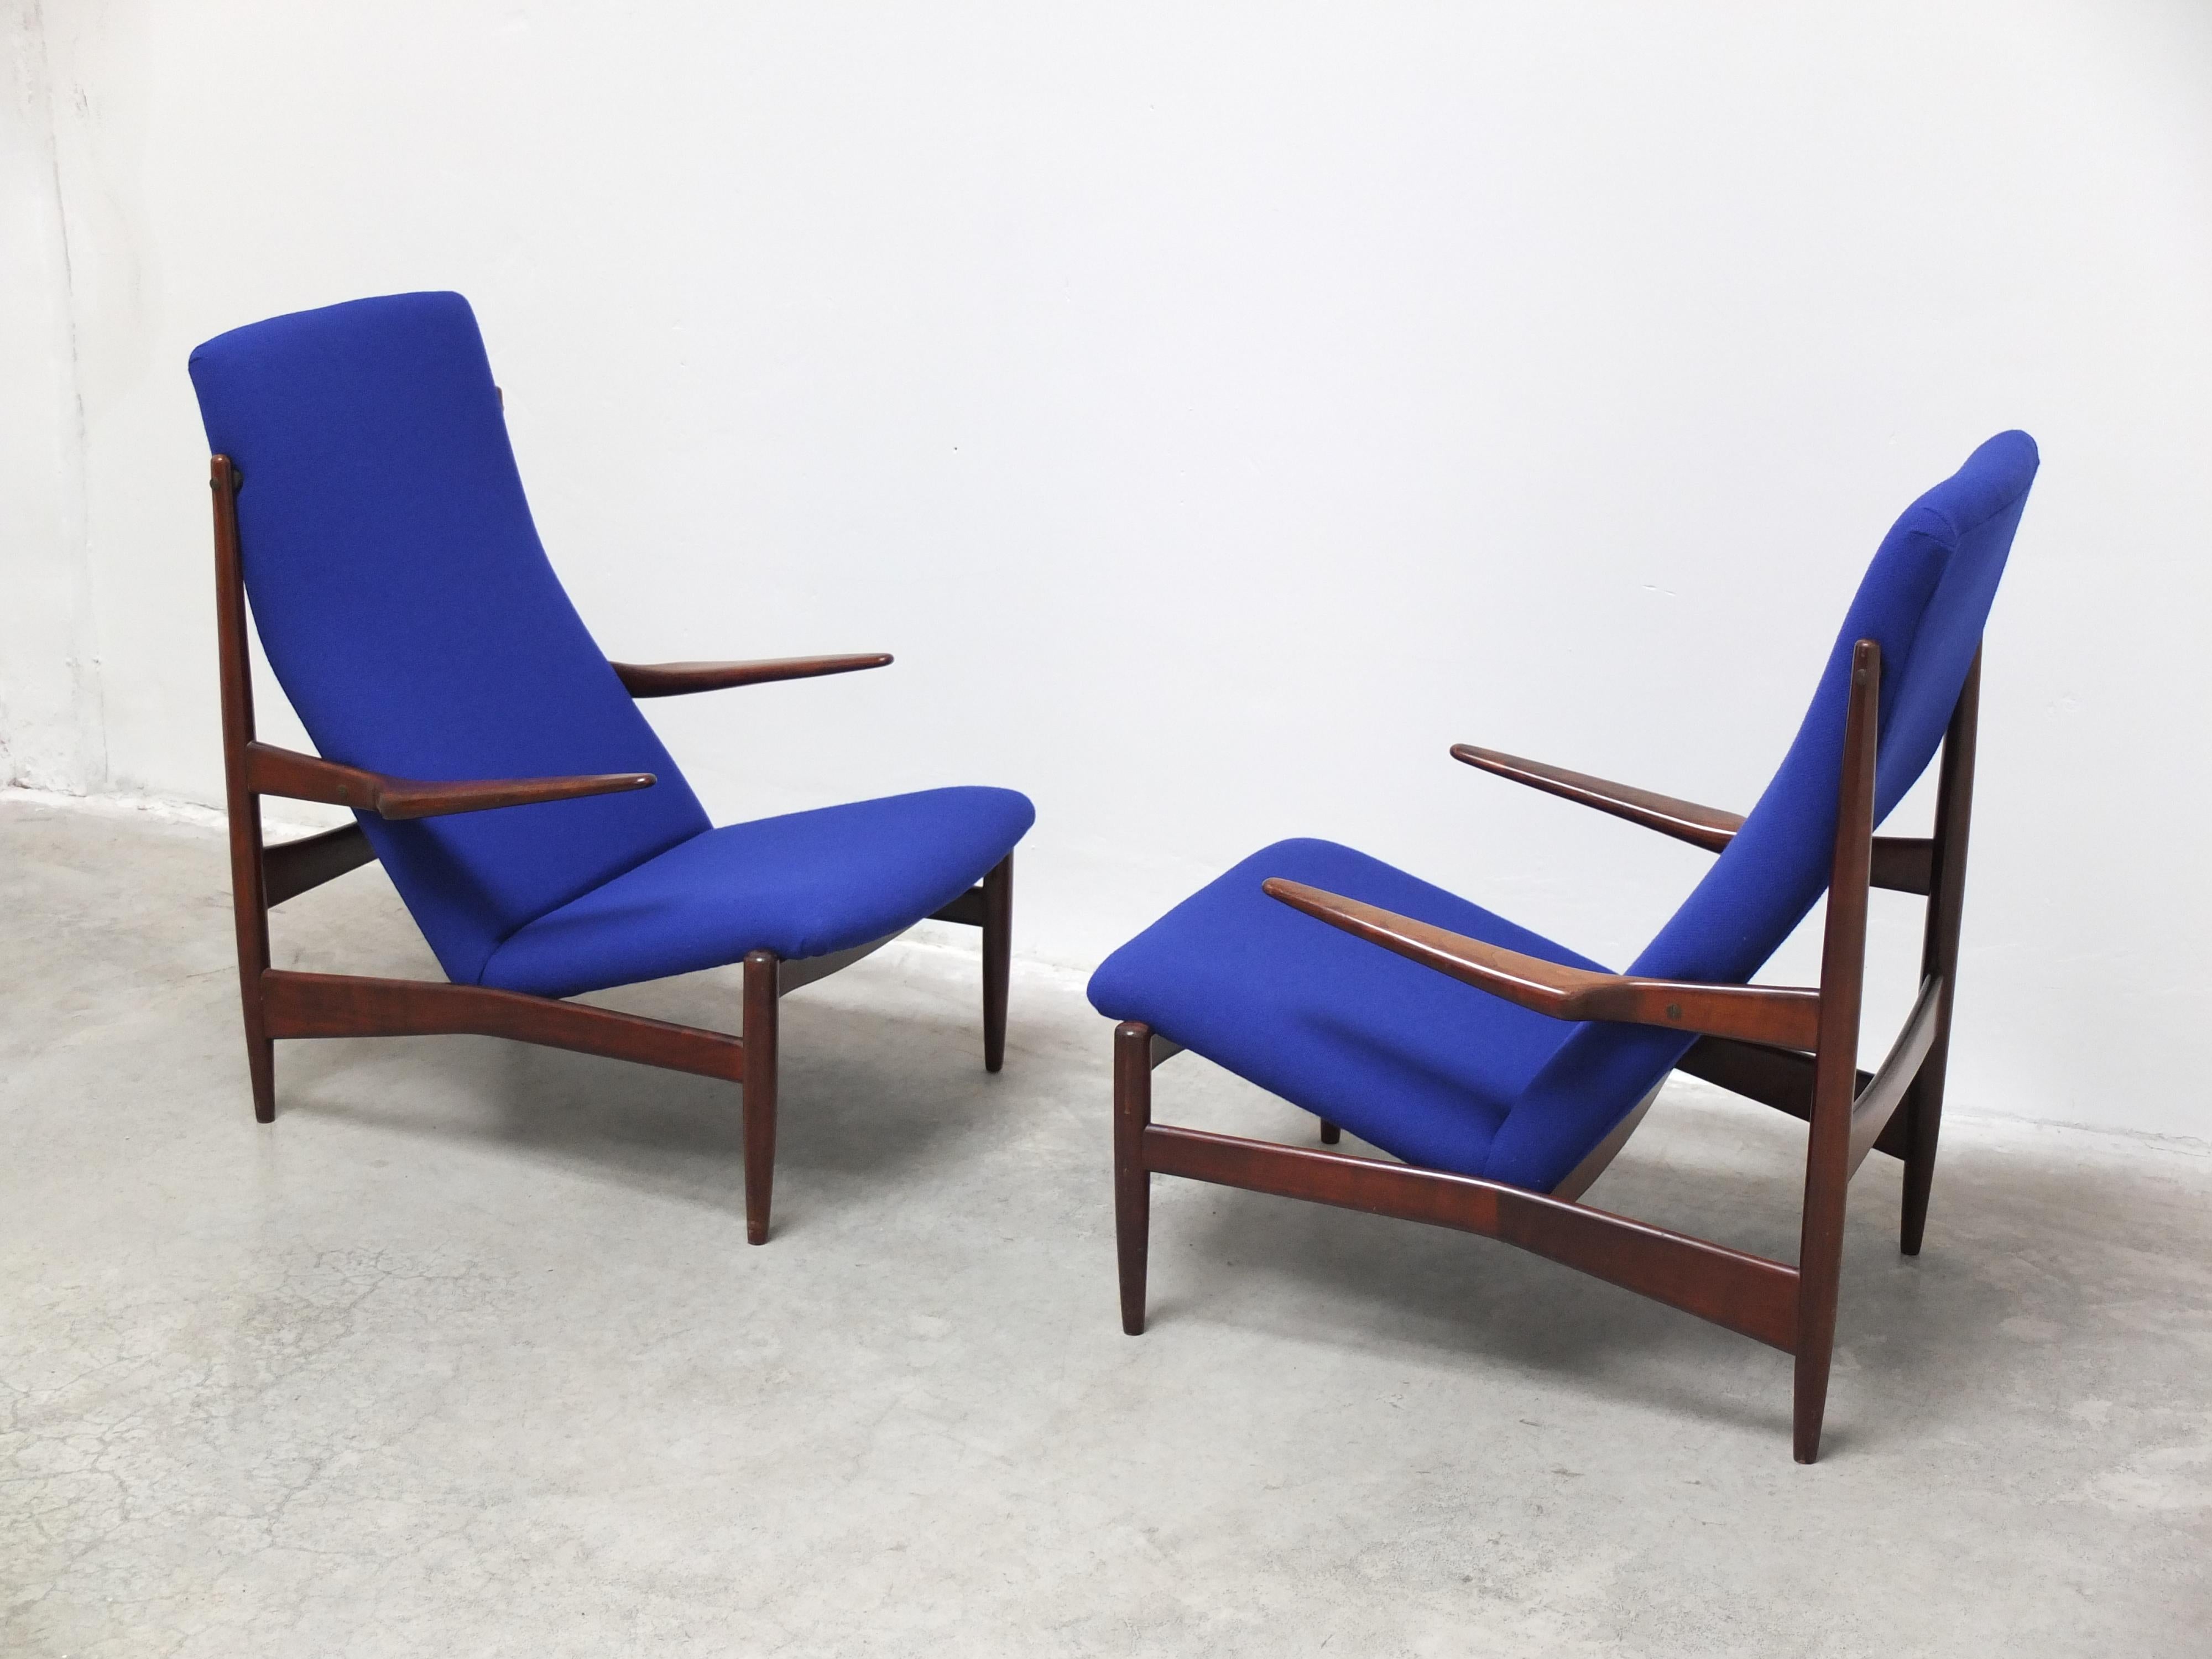 Belgian Rare Pair of Lounge Chairs by Alfred Hendrickx for Belform, 1950s For Sale